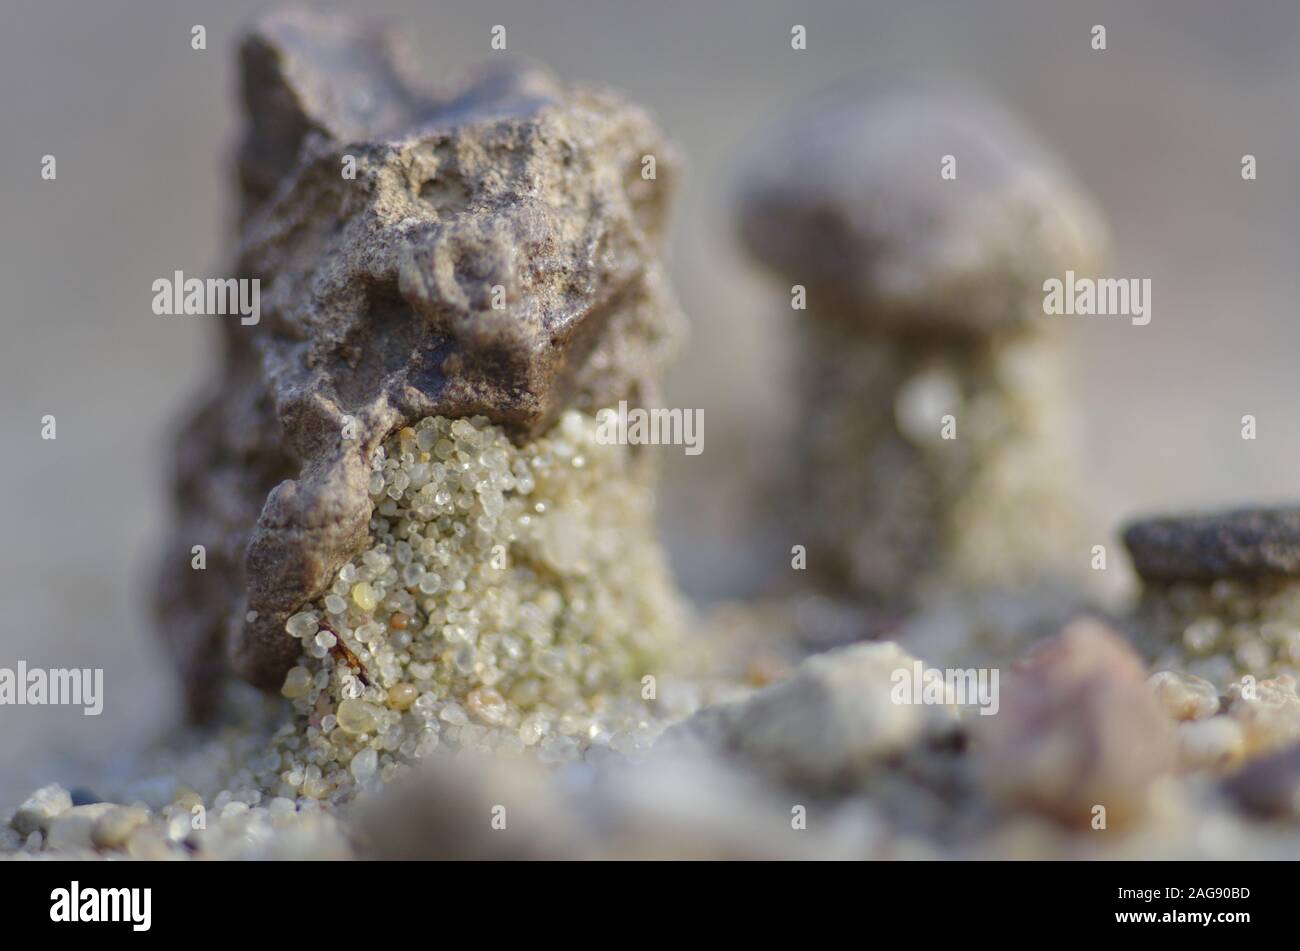 Close-up view of a small stone on sand Stock Photo